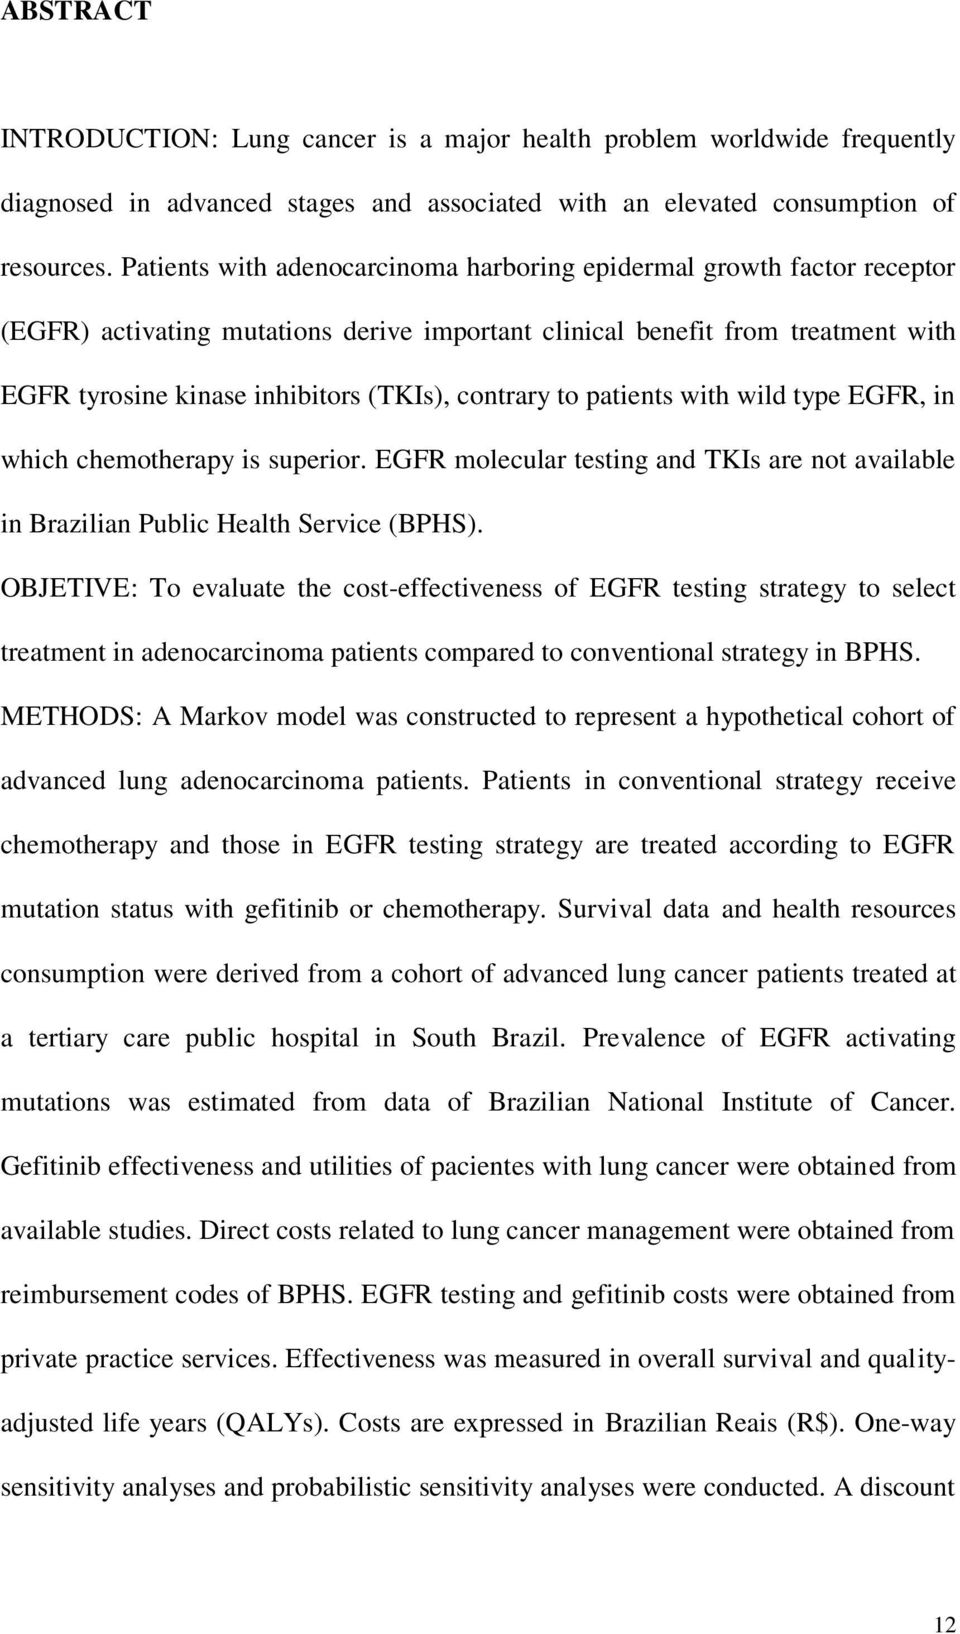 contrary to patients with wild type EGFR, in which chemotherapy is superior. EGFR molecular testing and TKIs are not available in Brazilian Public Health Service (BPHS).